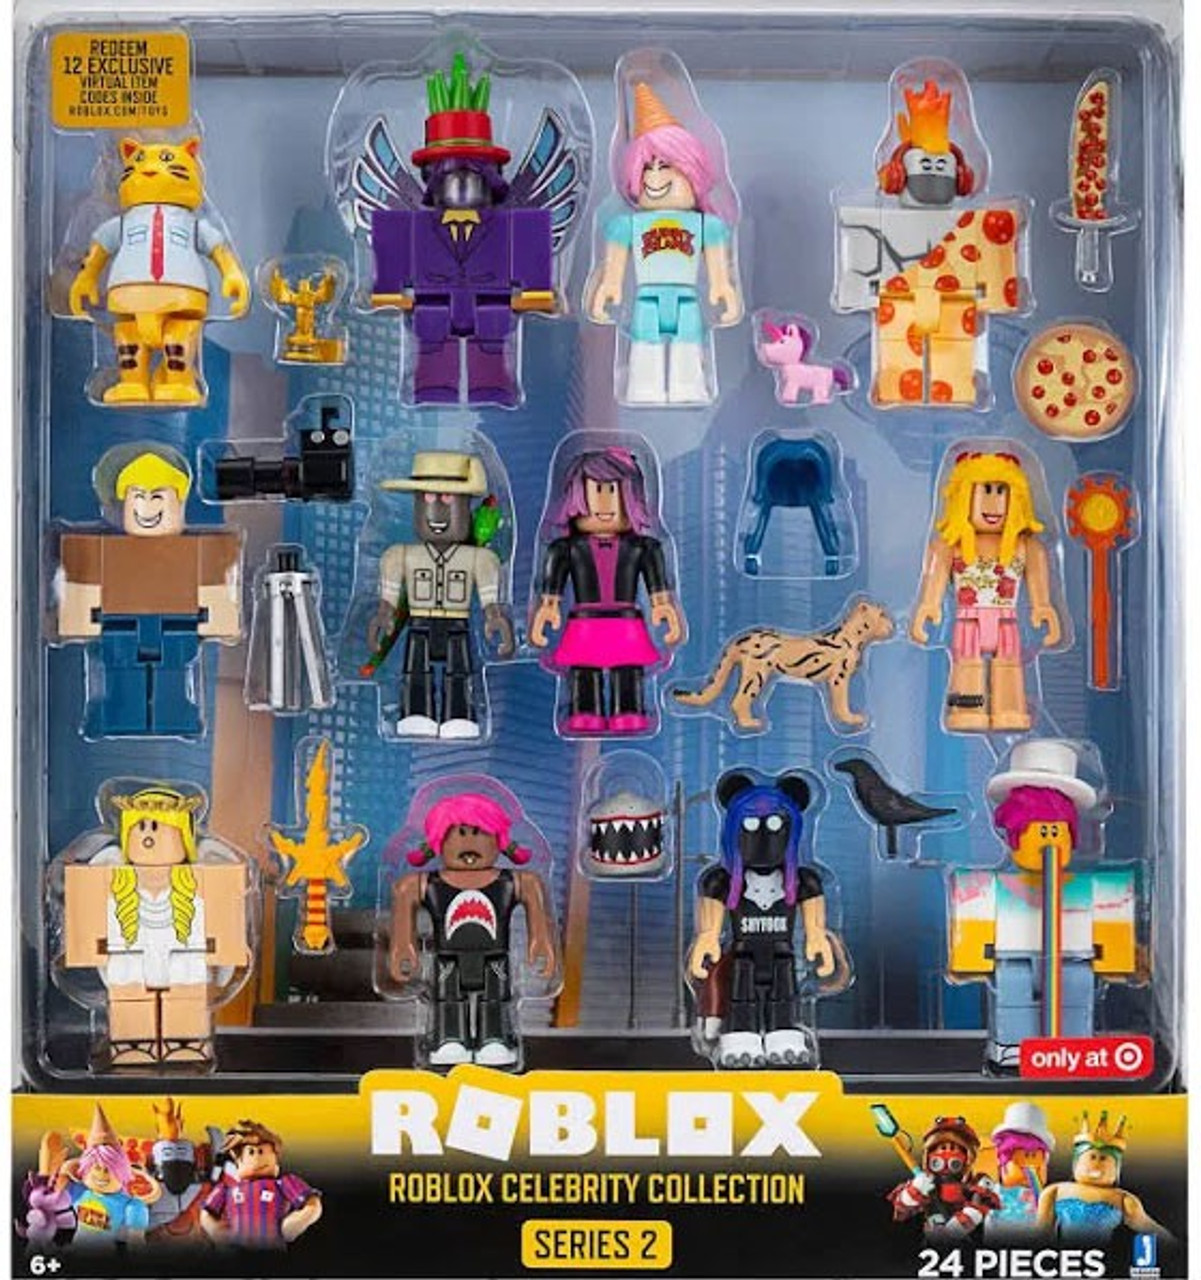 Roblox Series 2 Celebrity Collection Exclusive Action Figure 12 Pack Damaged Package - power ranger music id roblox